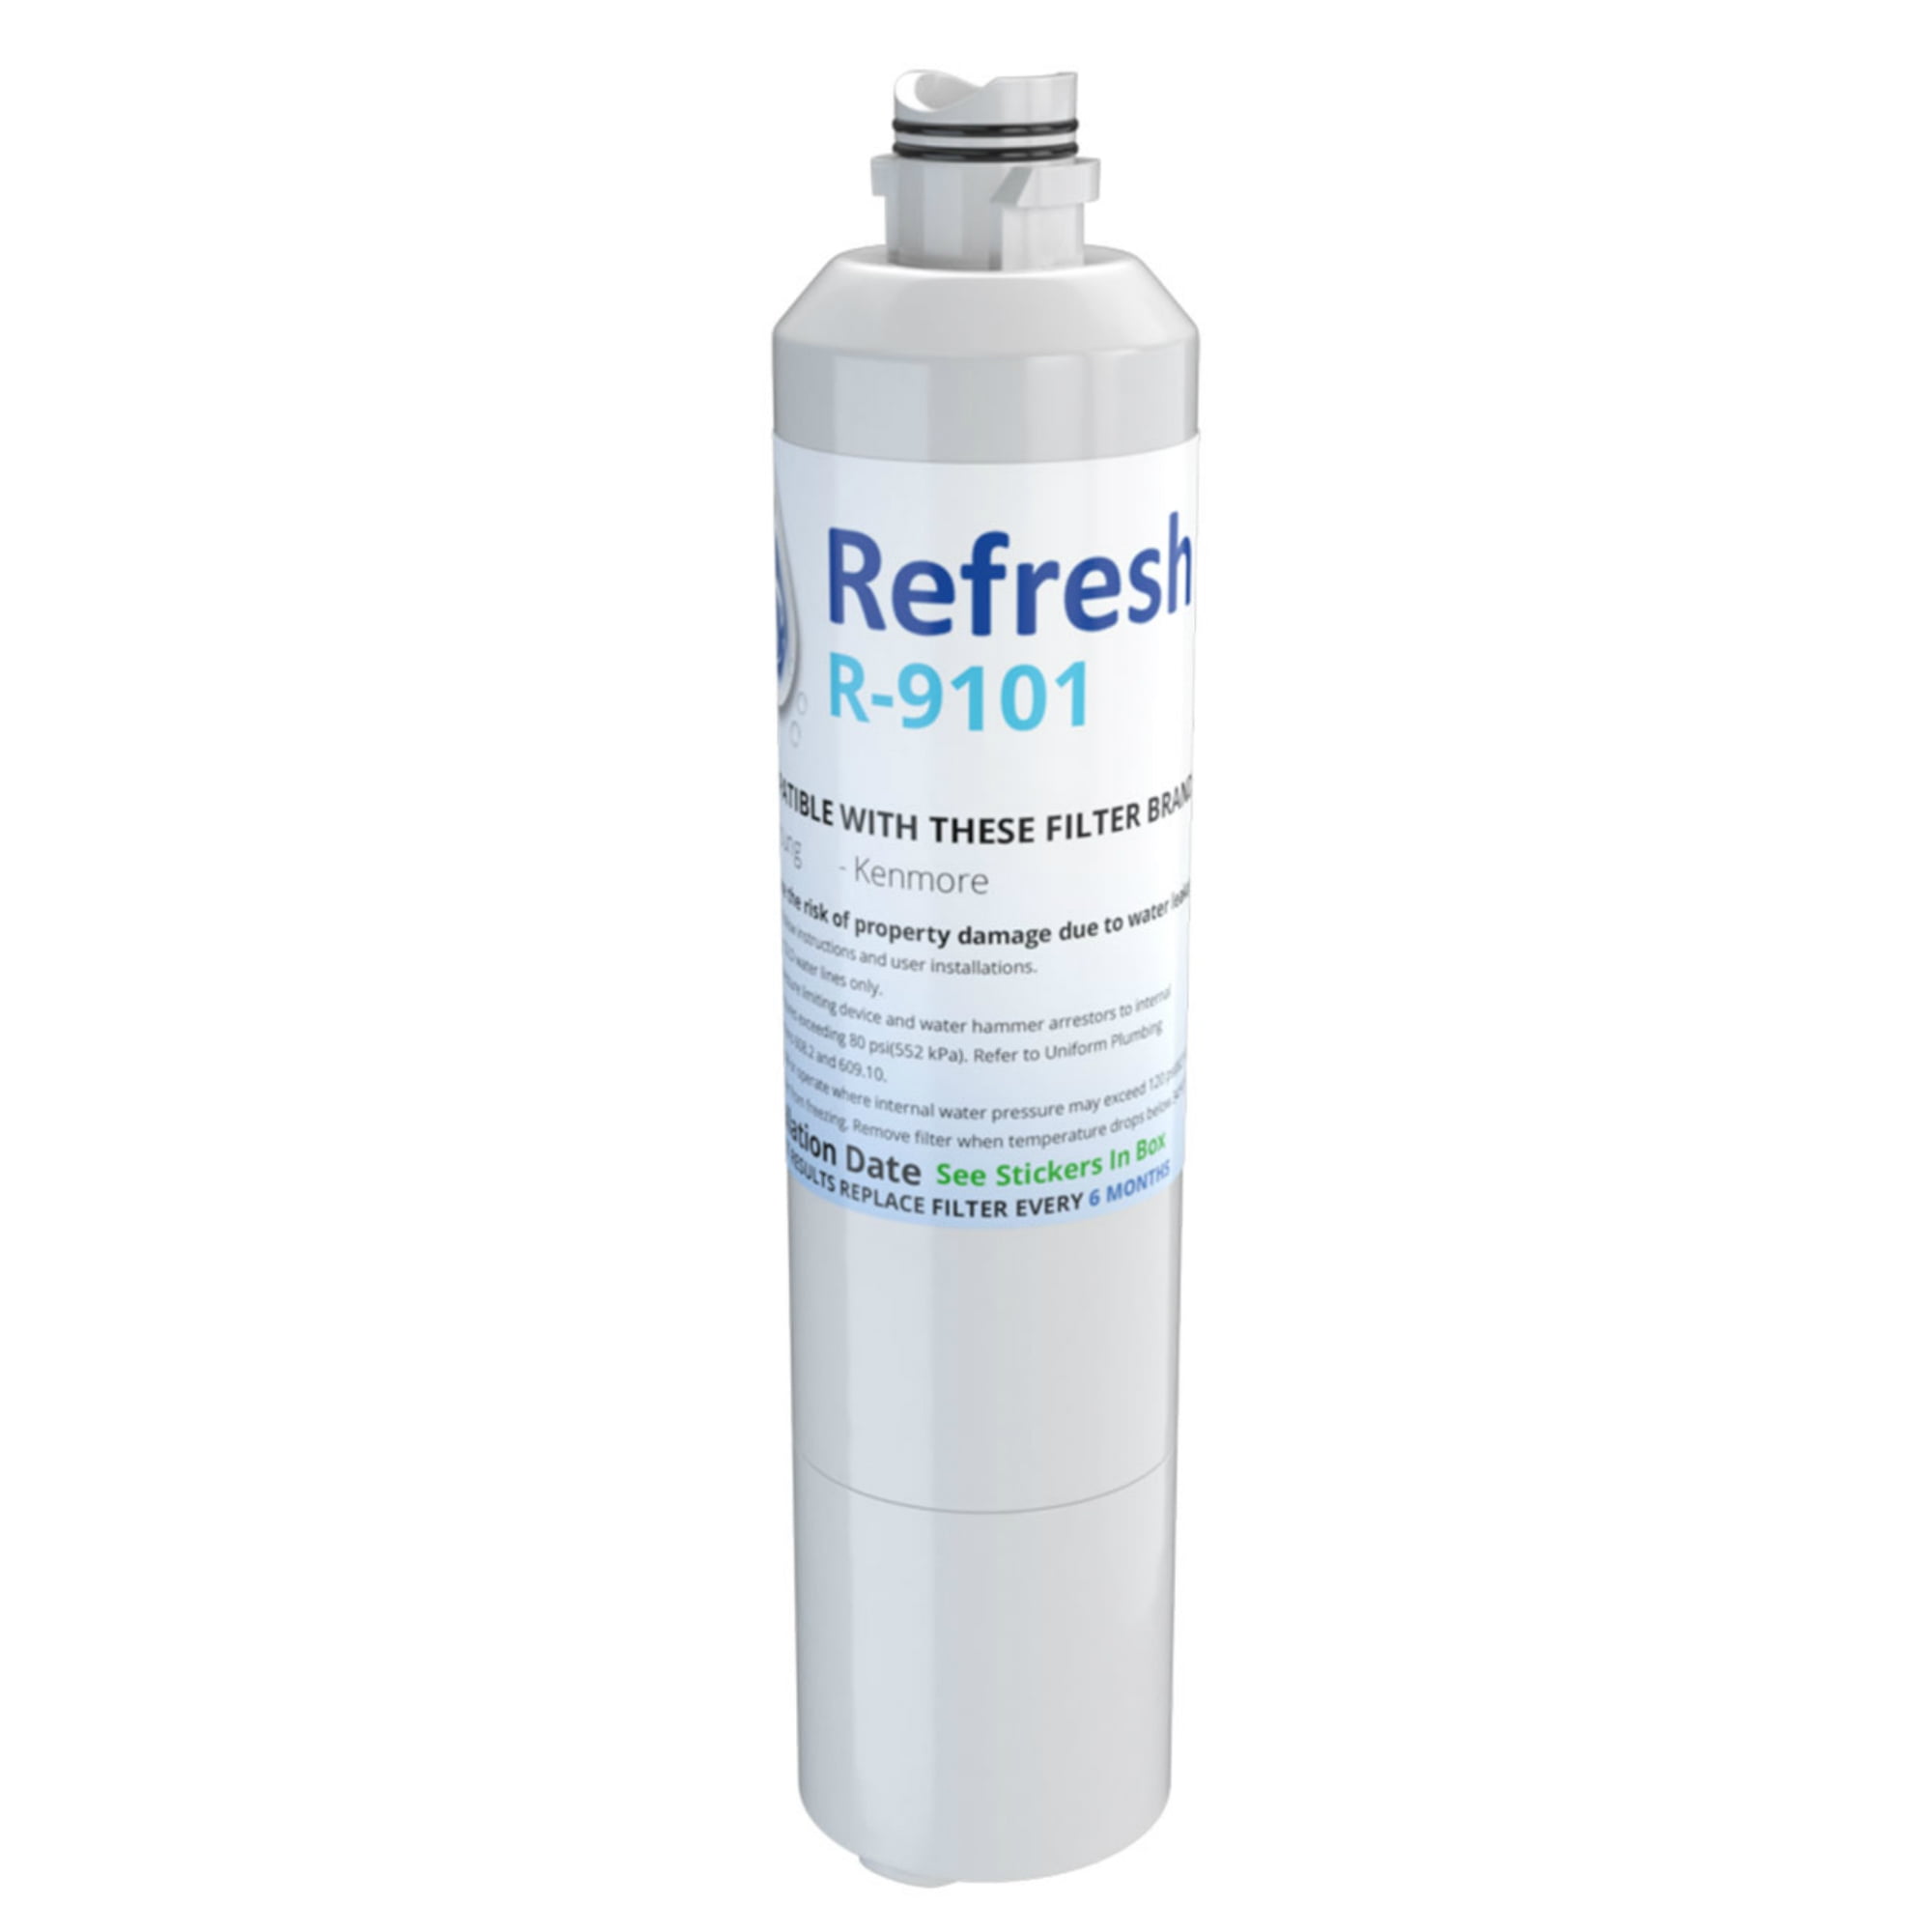 Fits Samsung R-9101 Refrigerators Refresh Replacement Water Filter 4 Pack 